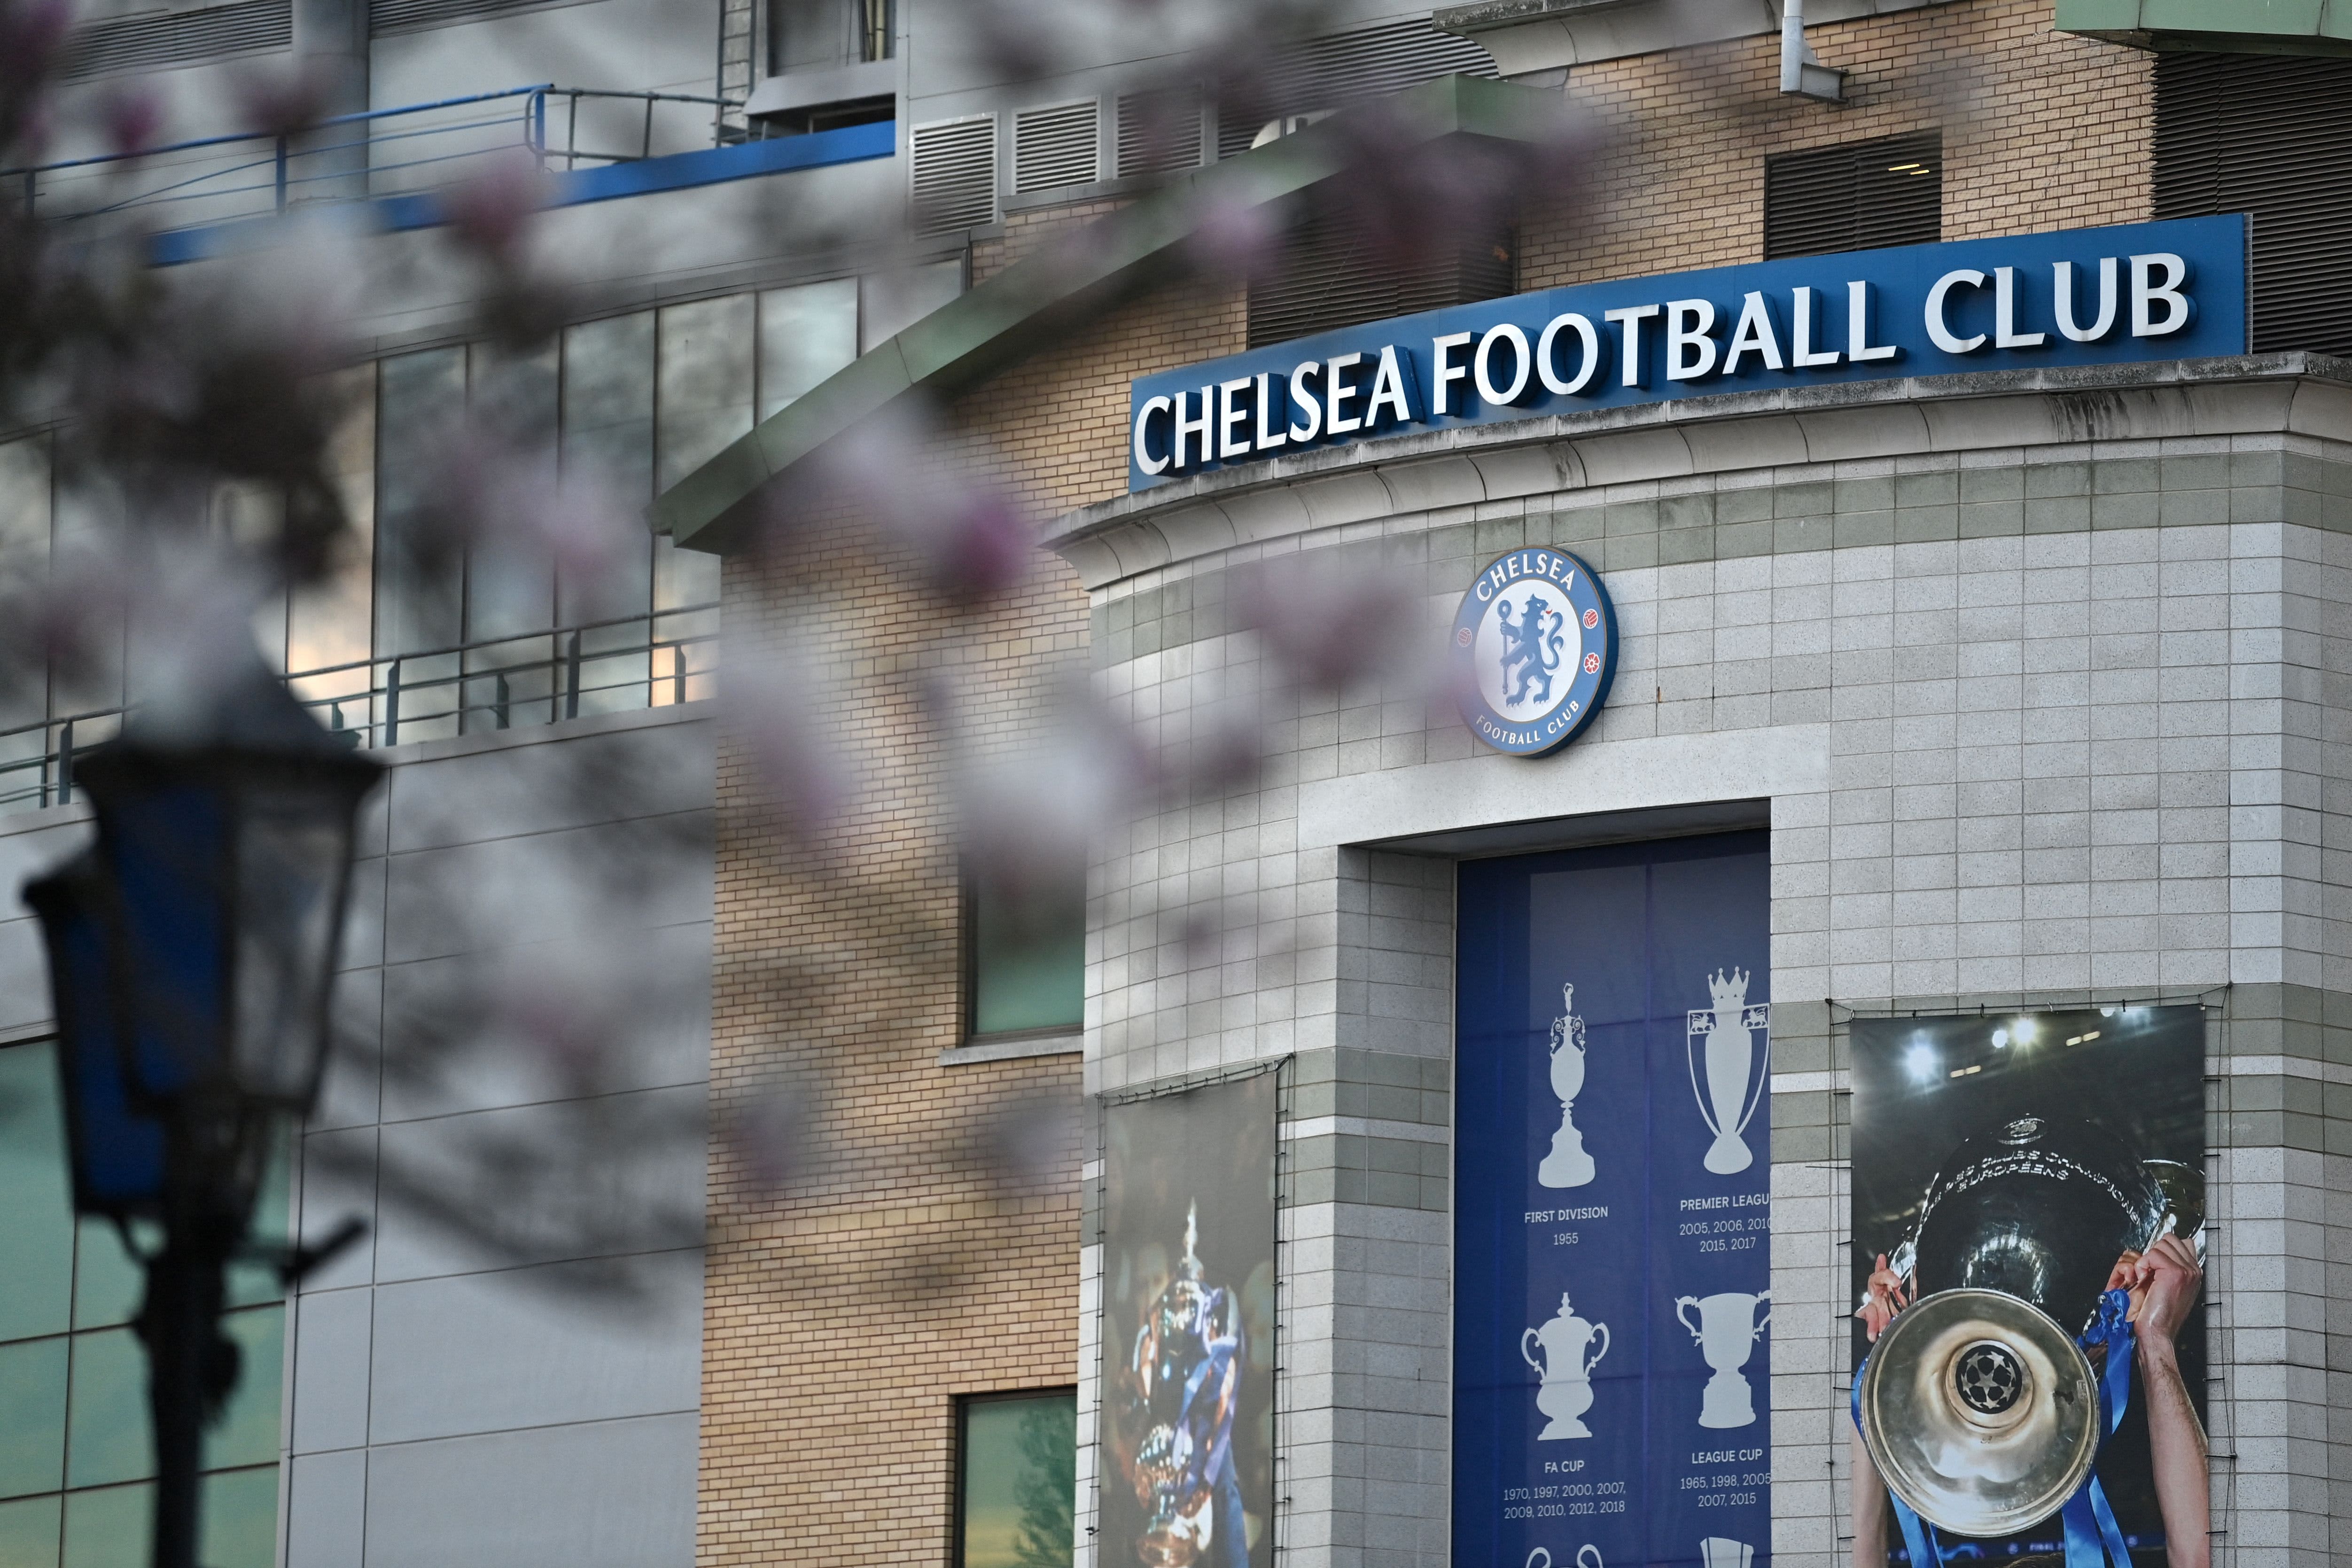 Sanctions for Russian oligarch Abramovich leave his Chelsea soccer club in a precarious position